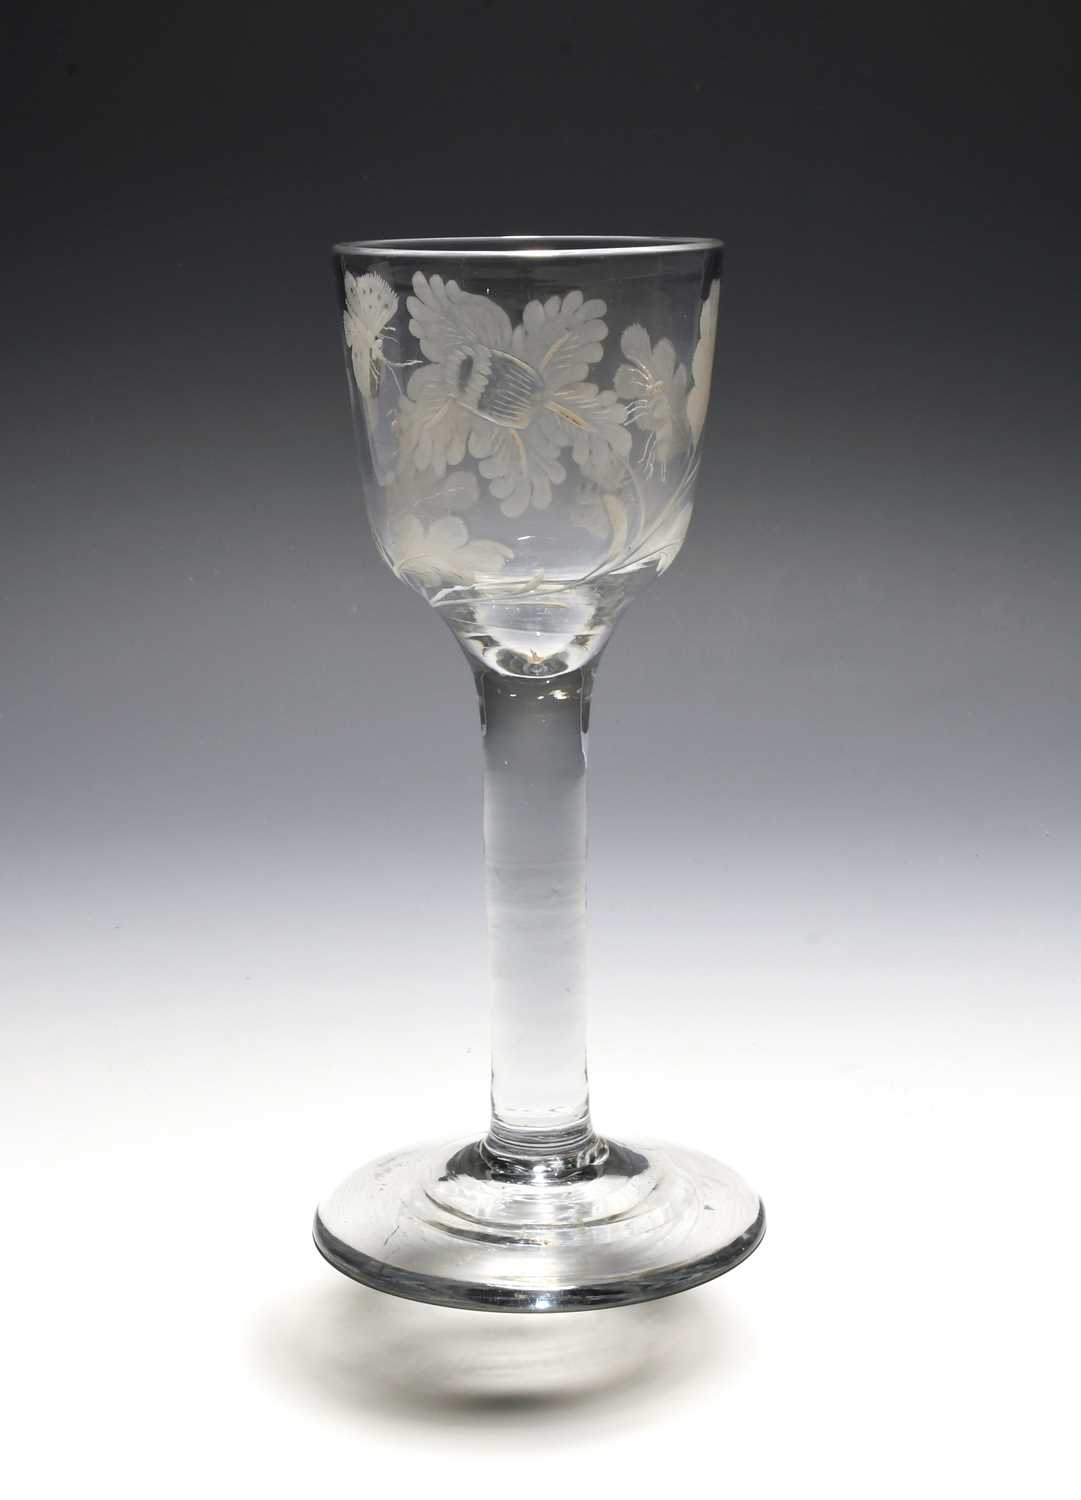 An unusual wine glass of Jacobite significance, c.1750-60, the deep ogee bowl engraved with a